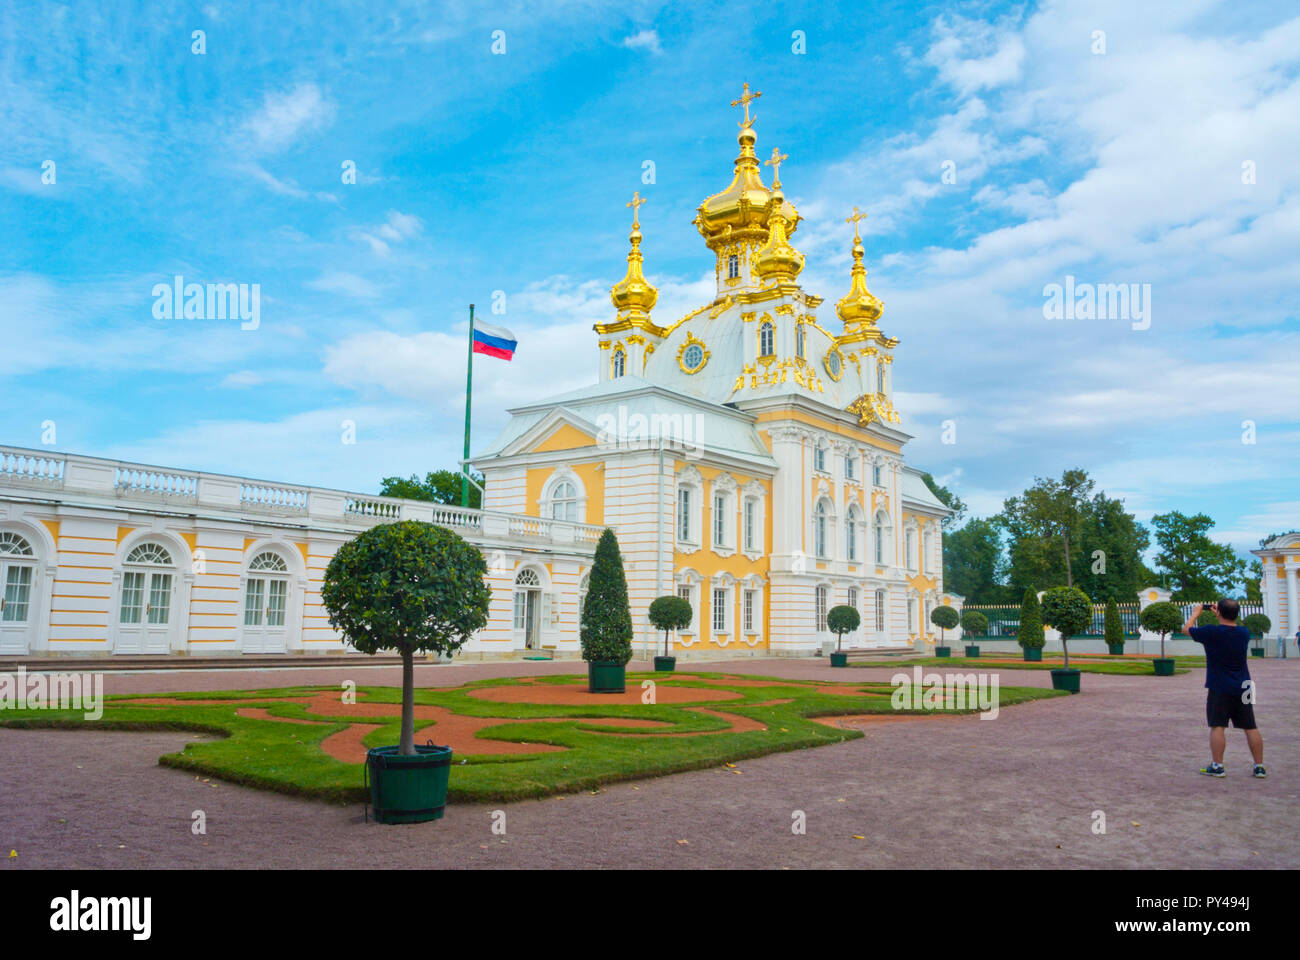 Palace Cathedral of Saints Peter and Paul, Peterhof, near Saint Petersburg, Russia Stock Photo